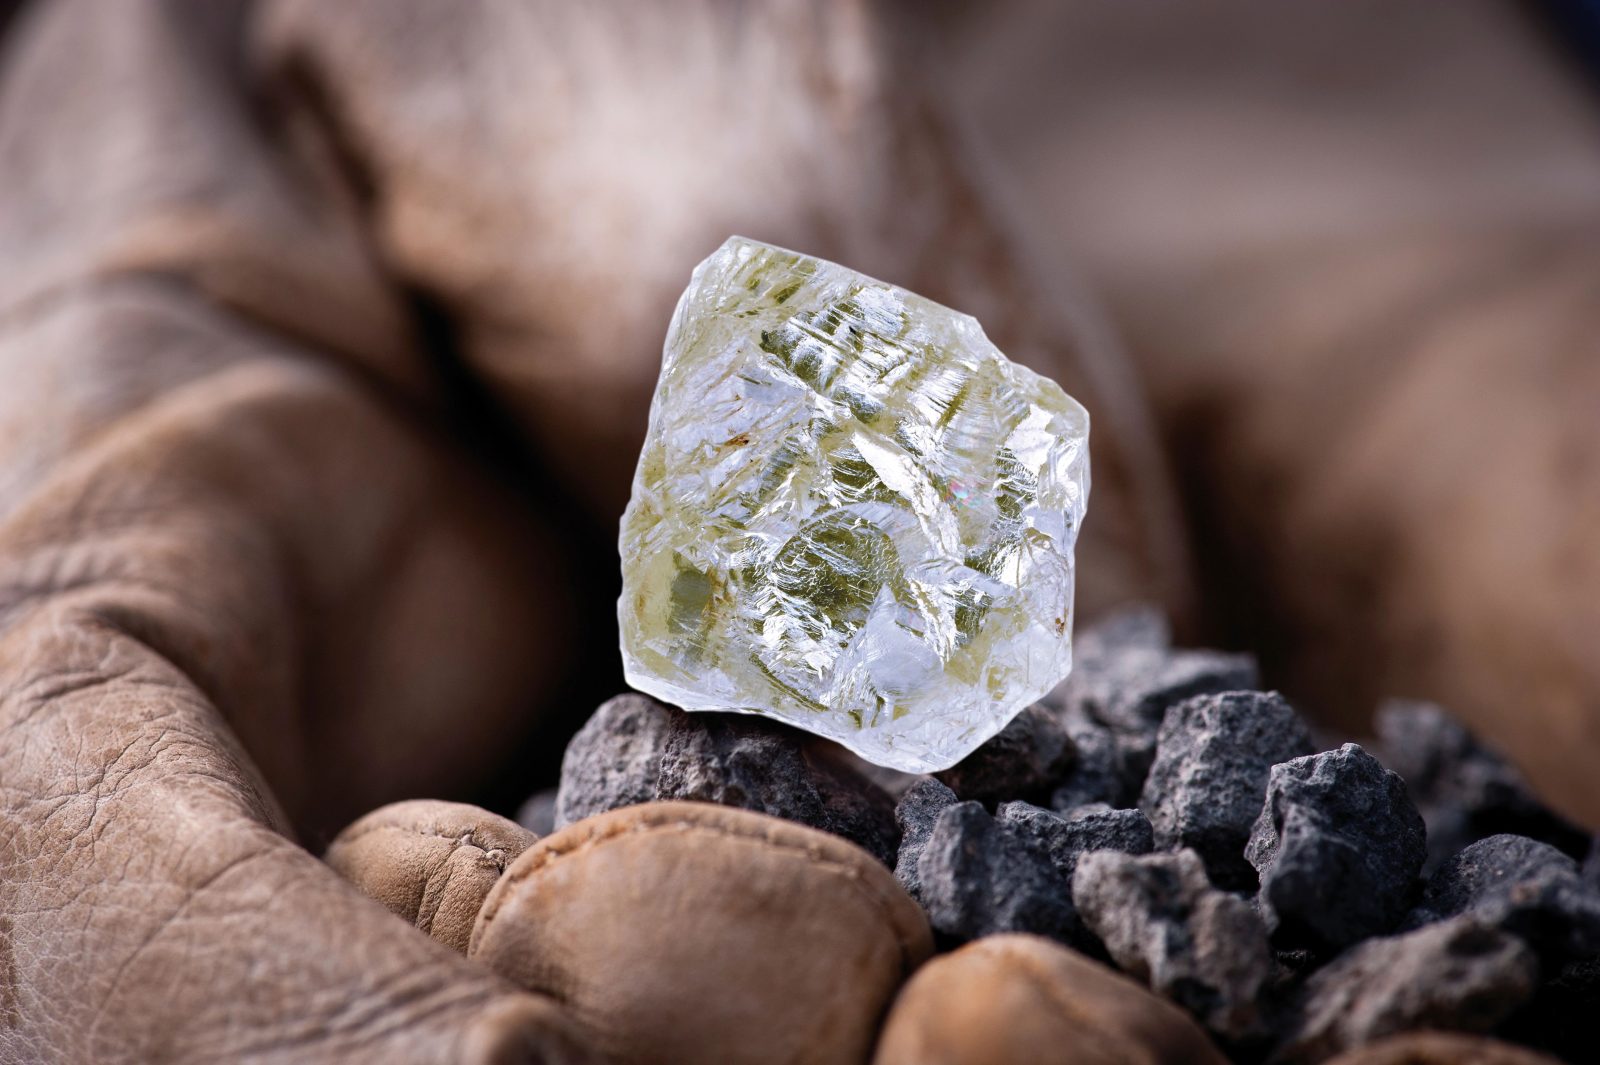 The 15 Largest Diamonds Discovered This Century